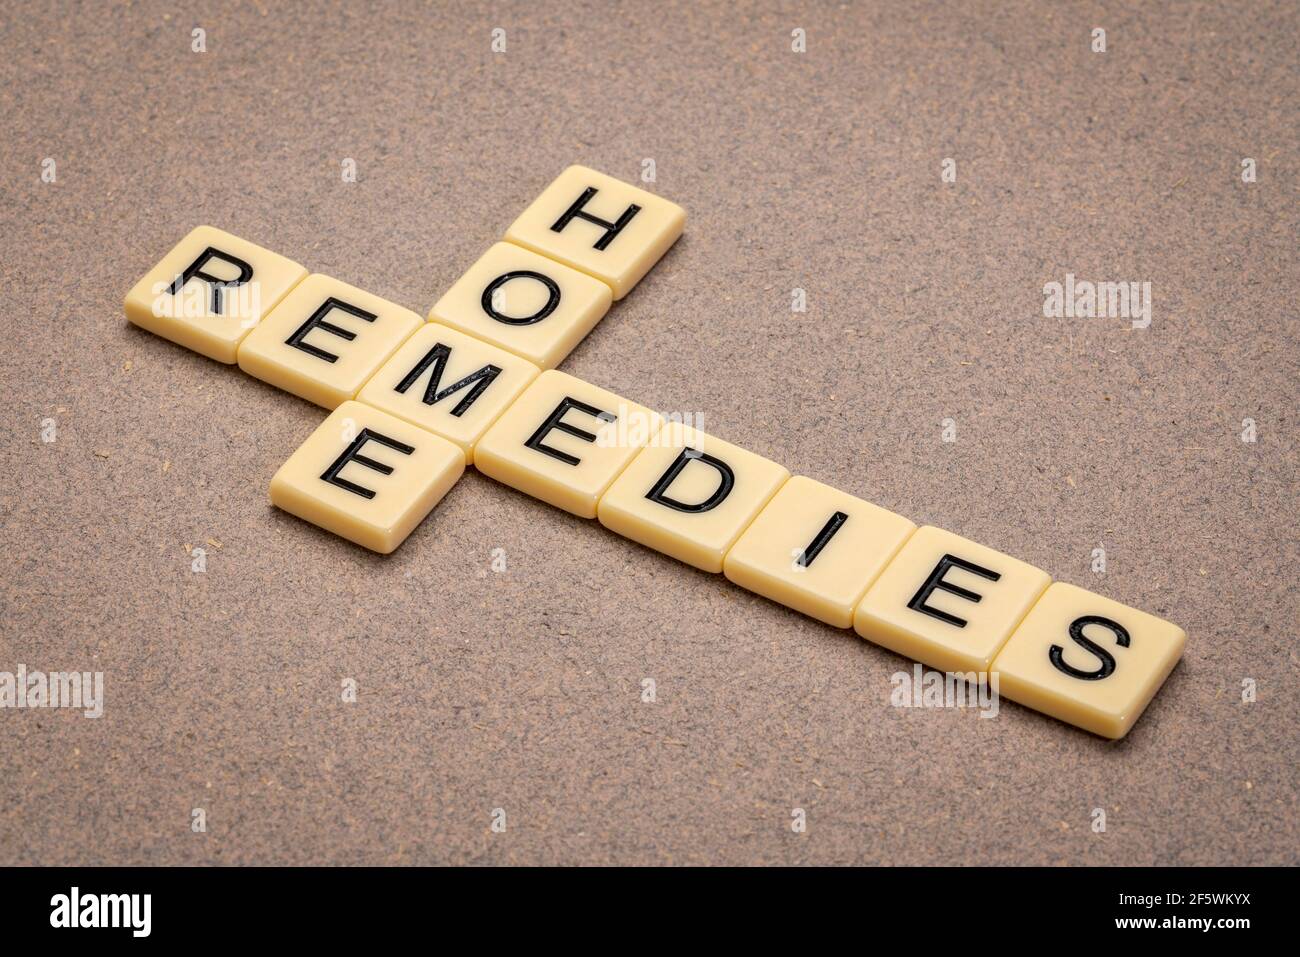 home remedies crossword in ivory letter tiles against textured paper, lifestyle and self care concept Stock Photo